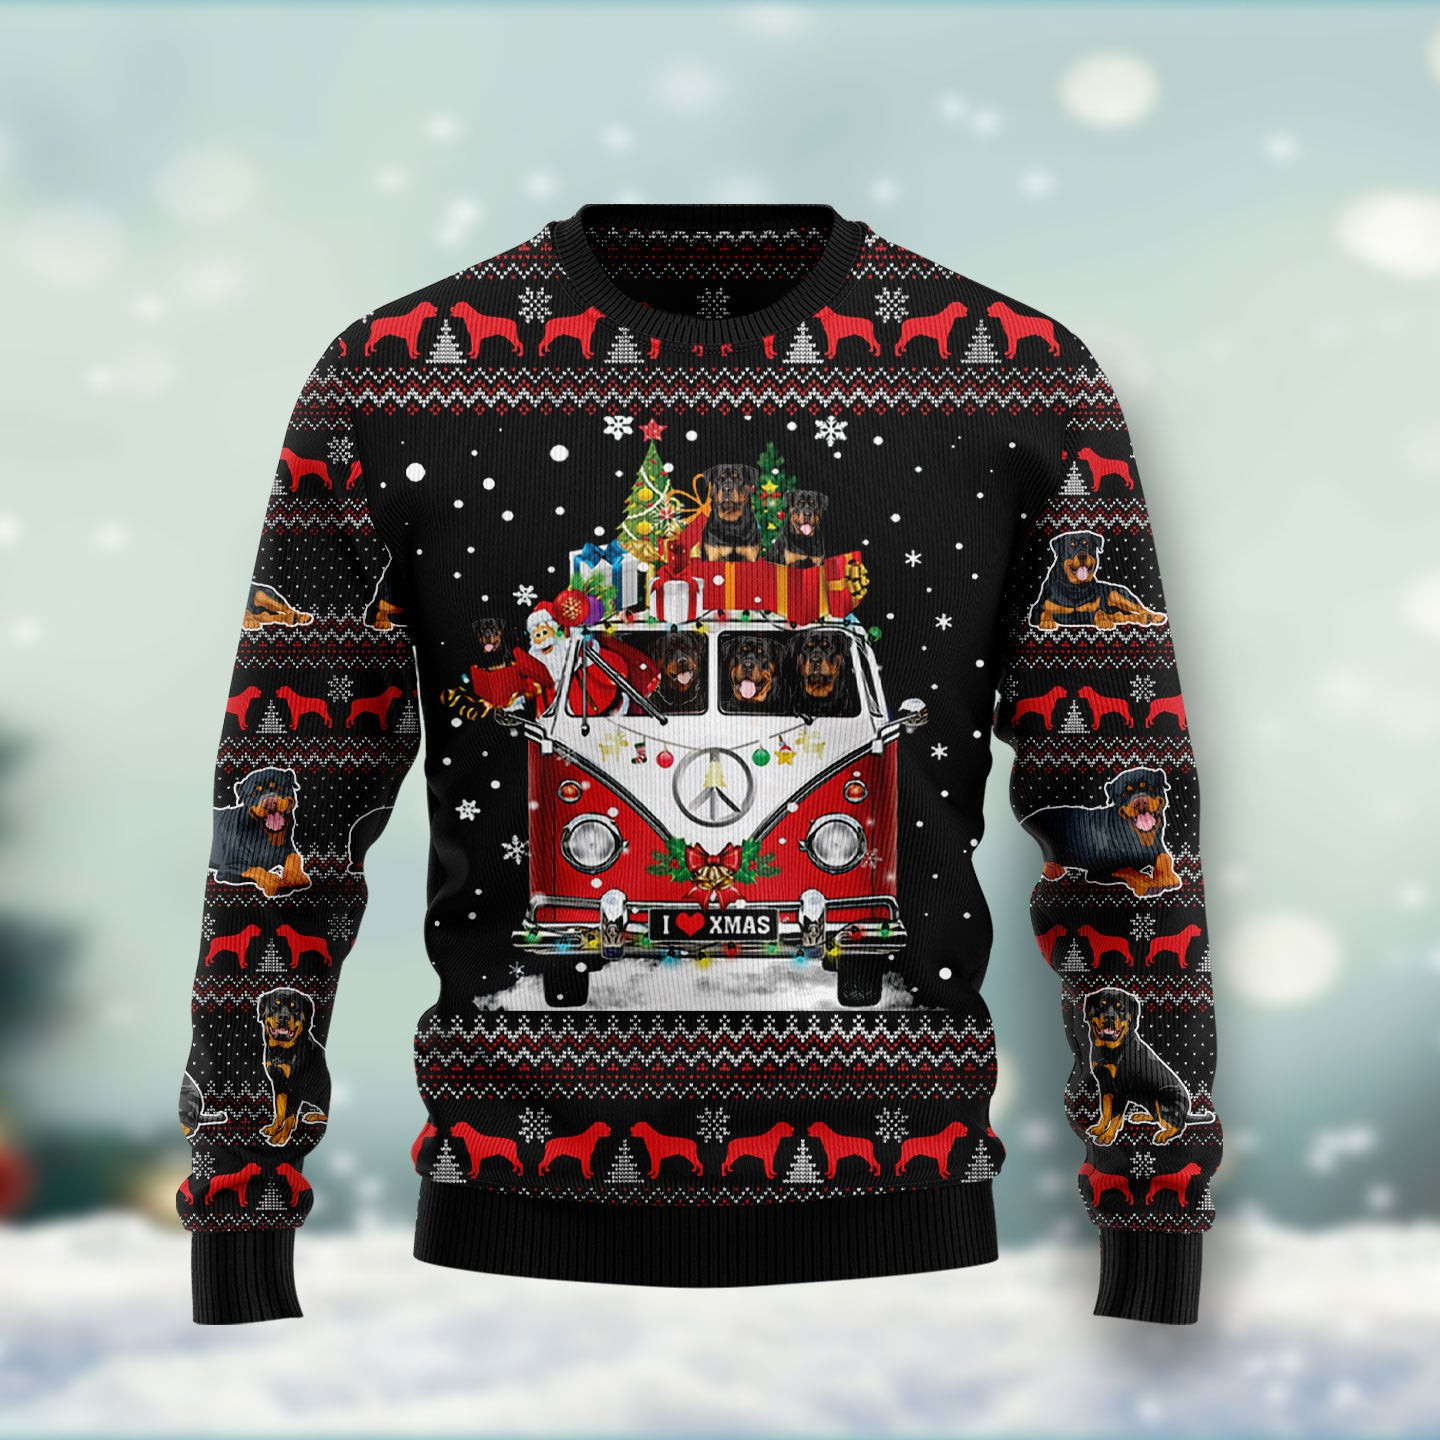 Rottweiler I Love Xmas Ugly Christmas Sweater, Ugly Sweater For Men Women, Holiday Sweater